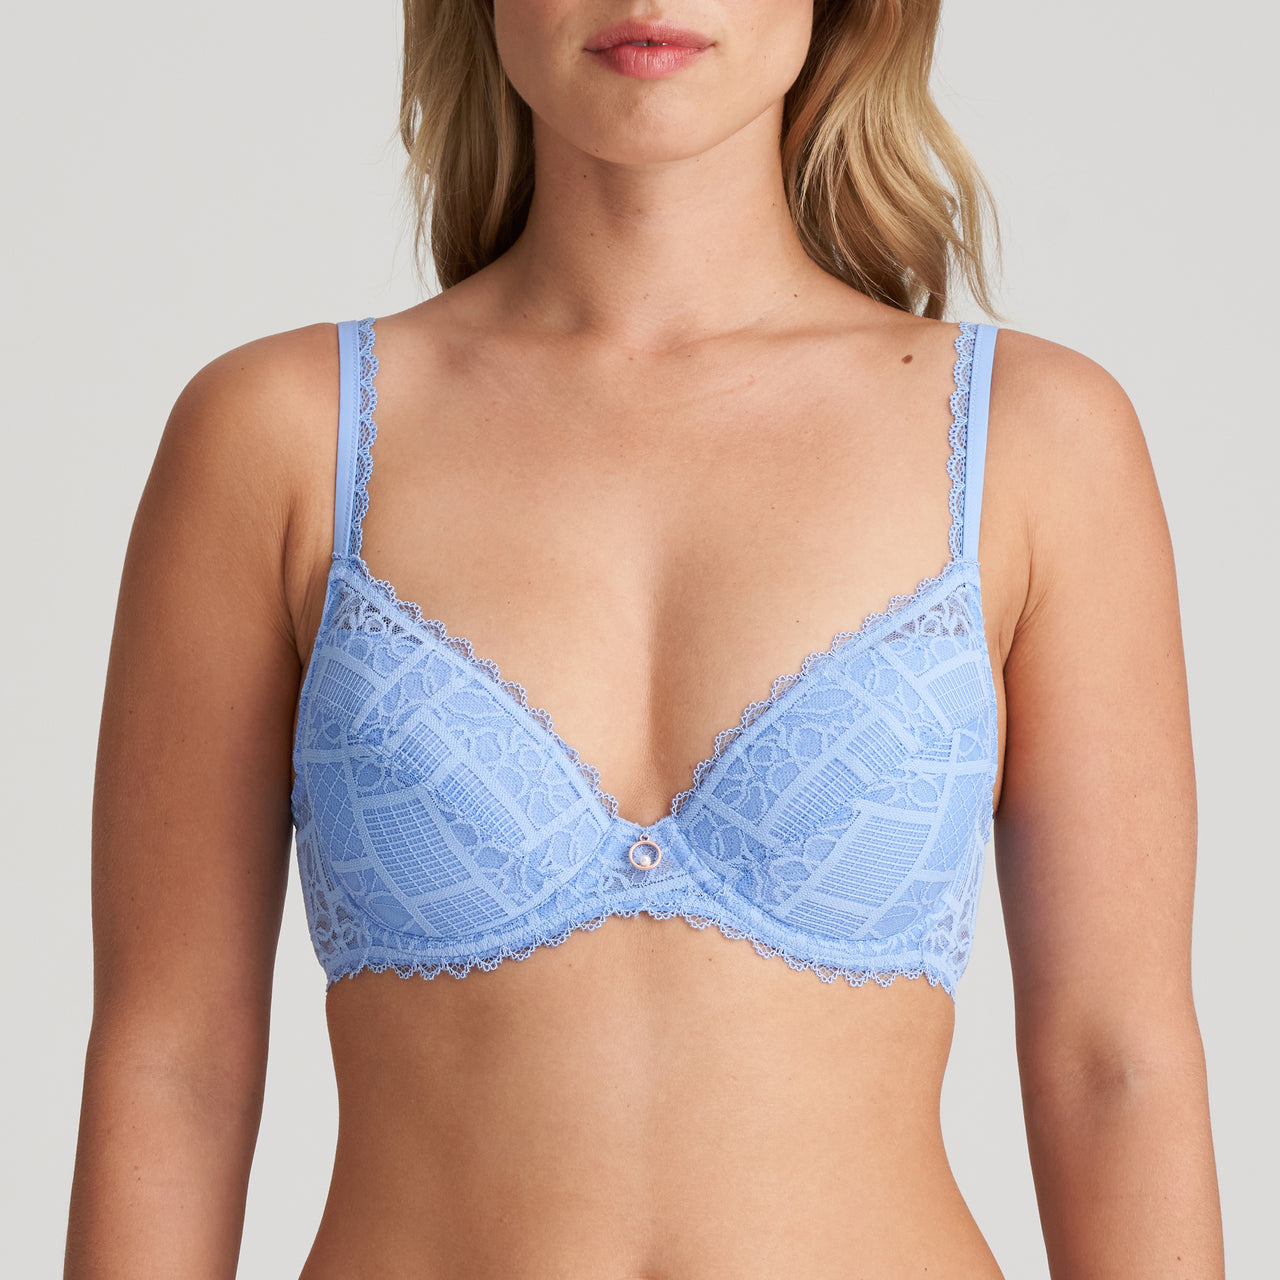 Jadei Open Air Push-up Bra Removable Pads